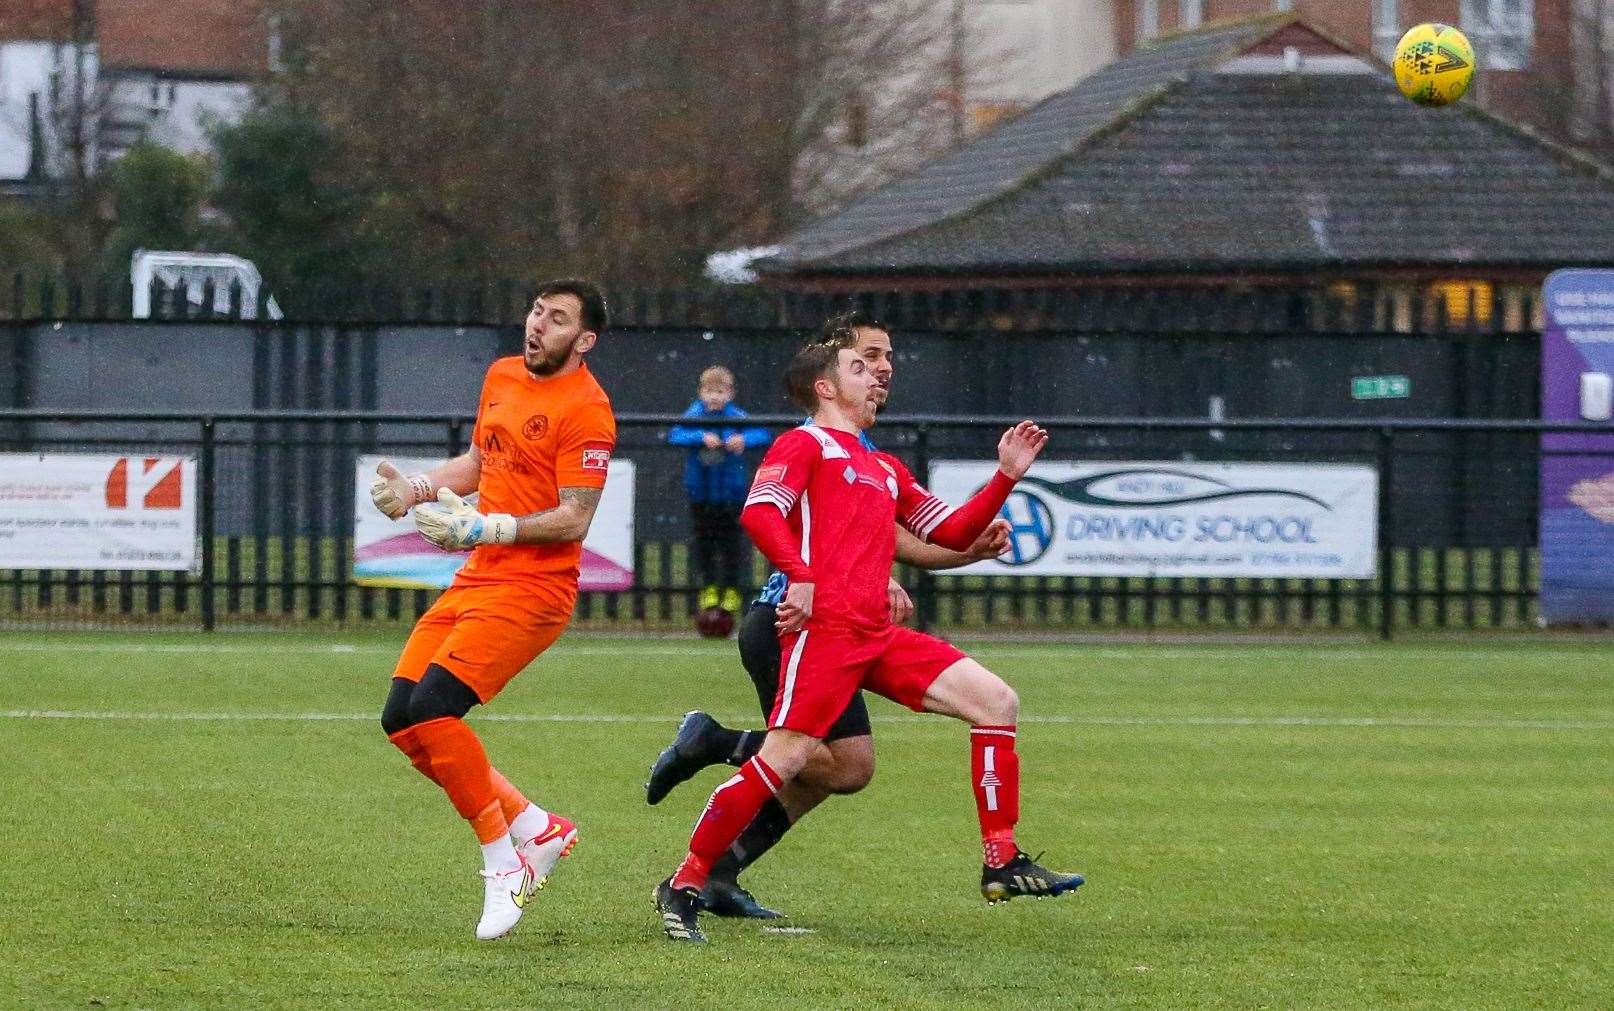 Jake Mackenzie lobs the ball in to score the only goal in Whitstable's 1-0 victory at Sevenoaks. Picture: Les Biggs